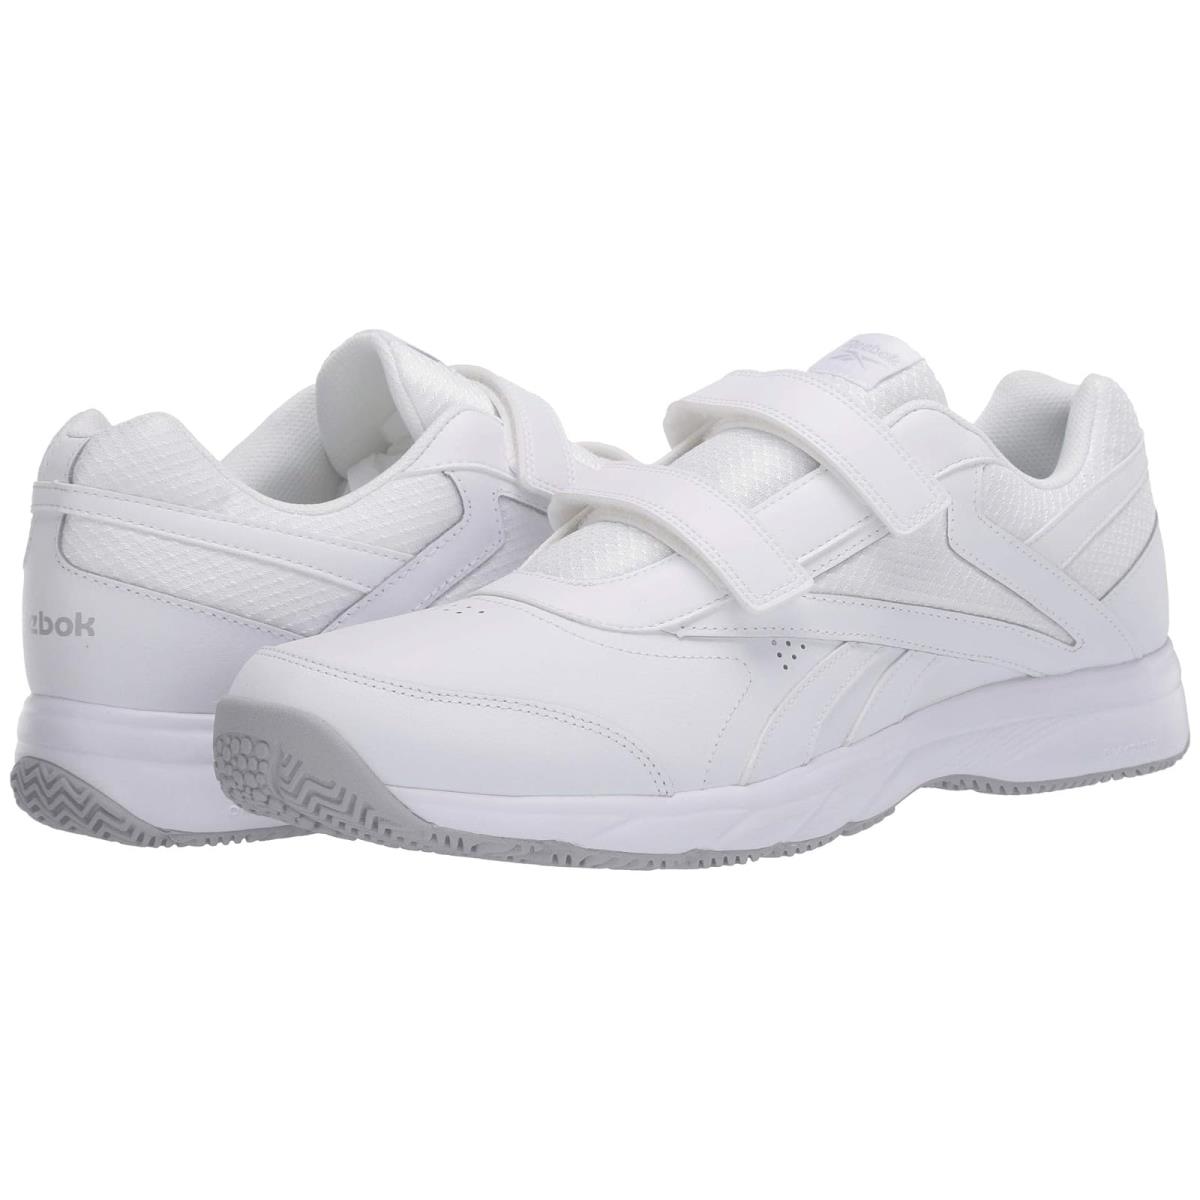 Man`s Sneakers Athletic Shoes Reebok Work N Cushion 4.0 KC White/Cold Grey/White